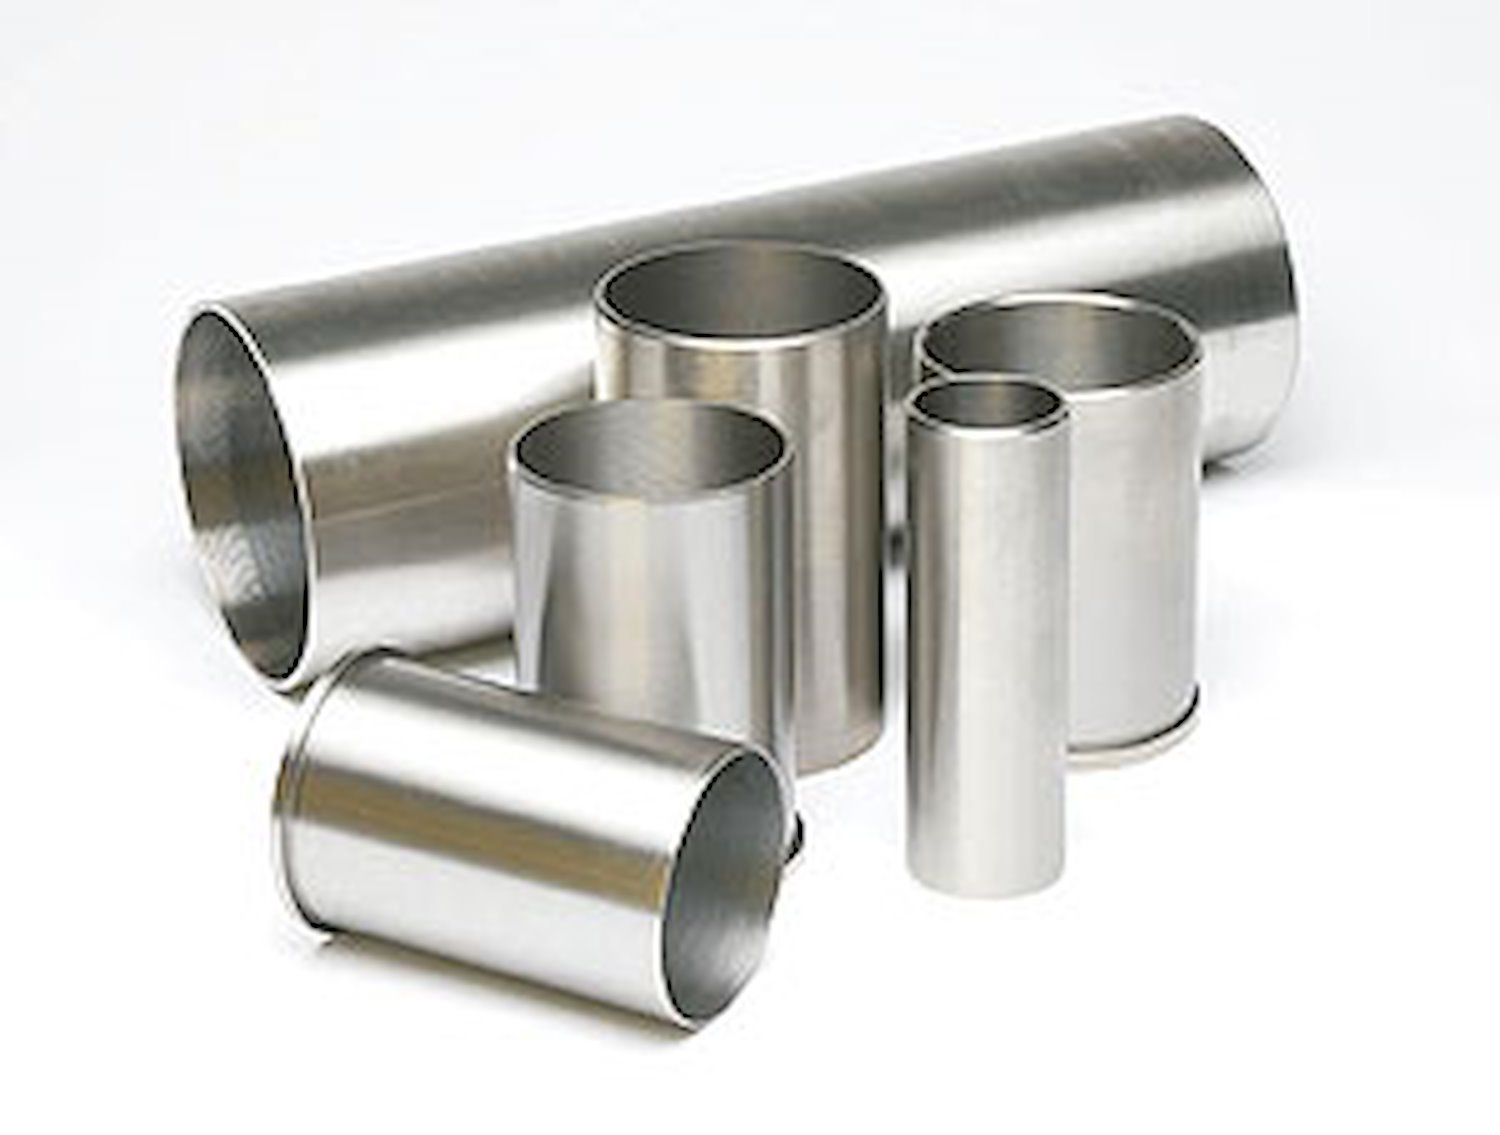 Cylinder Sleeve Bore: 2.7950" Length: 5-1/4" Wall Thickness: 1/8"